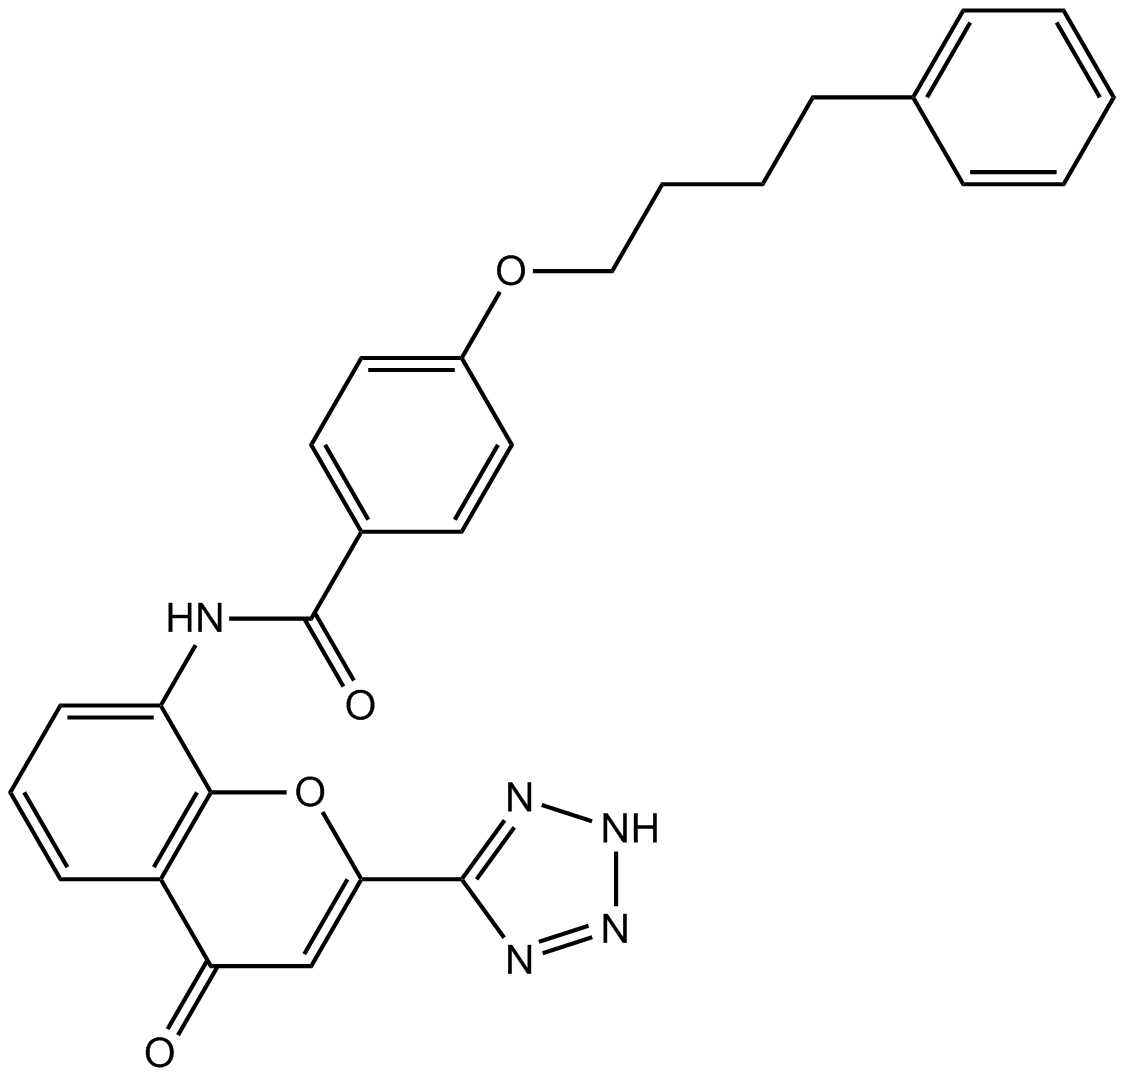 Pranlukast Chemical Structure